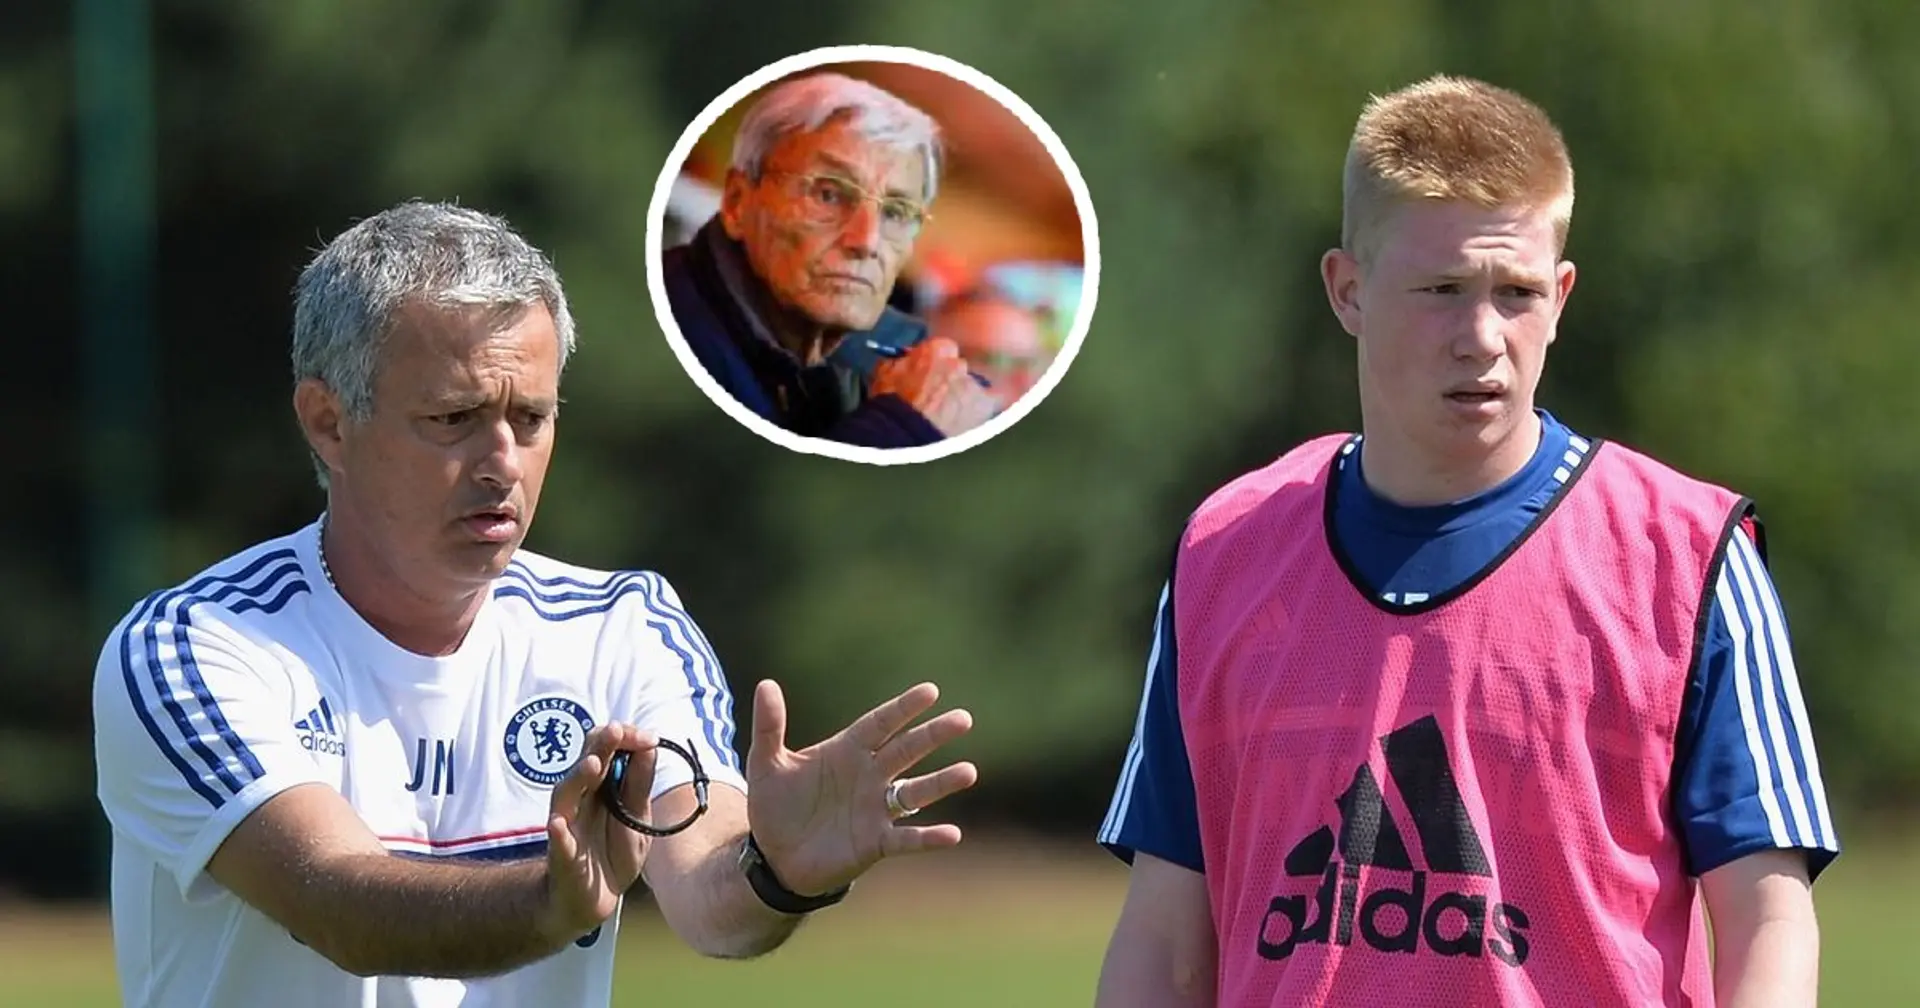 'He only called on old players': Mourinho's handling of De Bruyne at Chelsea revealed 